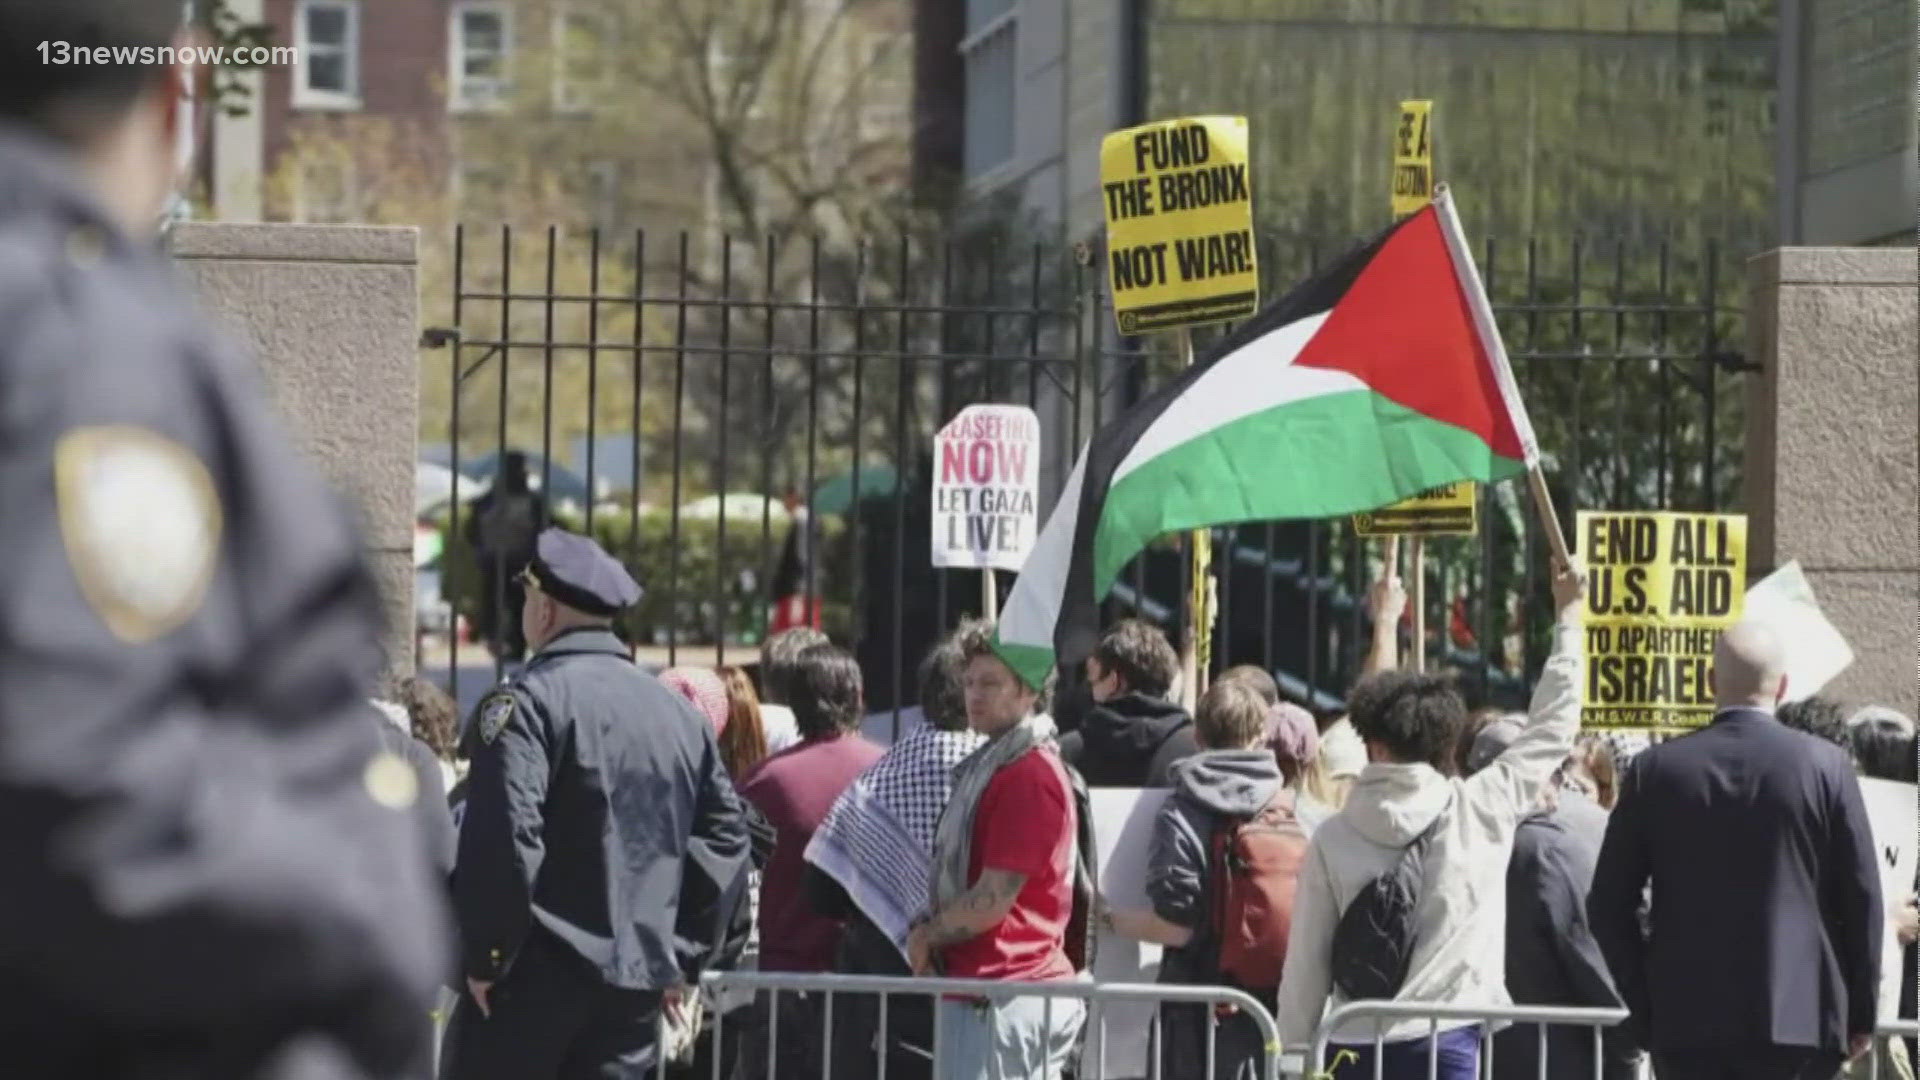 The wave of pro-Palestinian protests at universities across the country is growing and there are many instances of police clashing with those protesters.